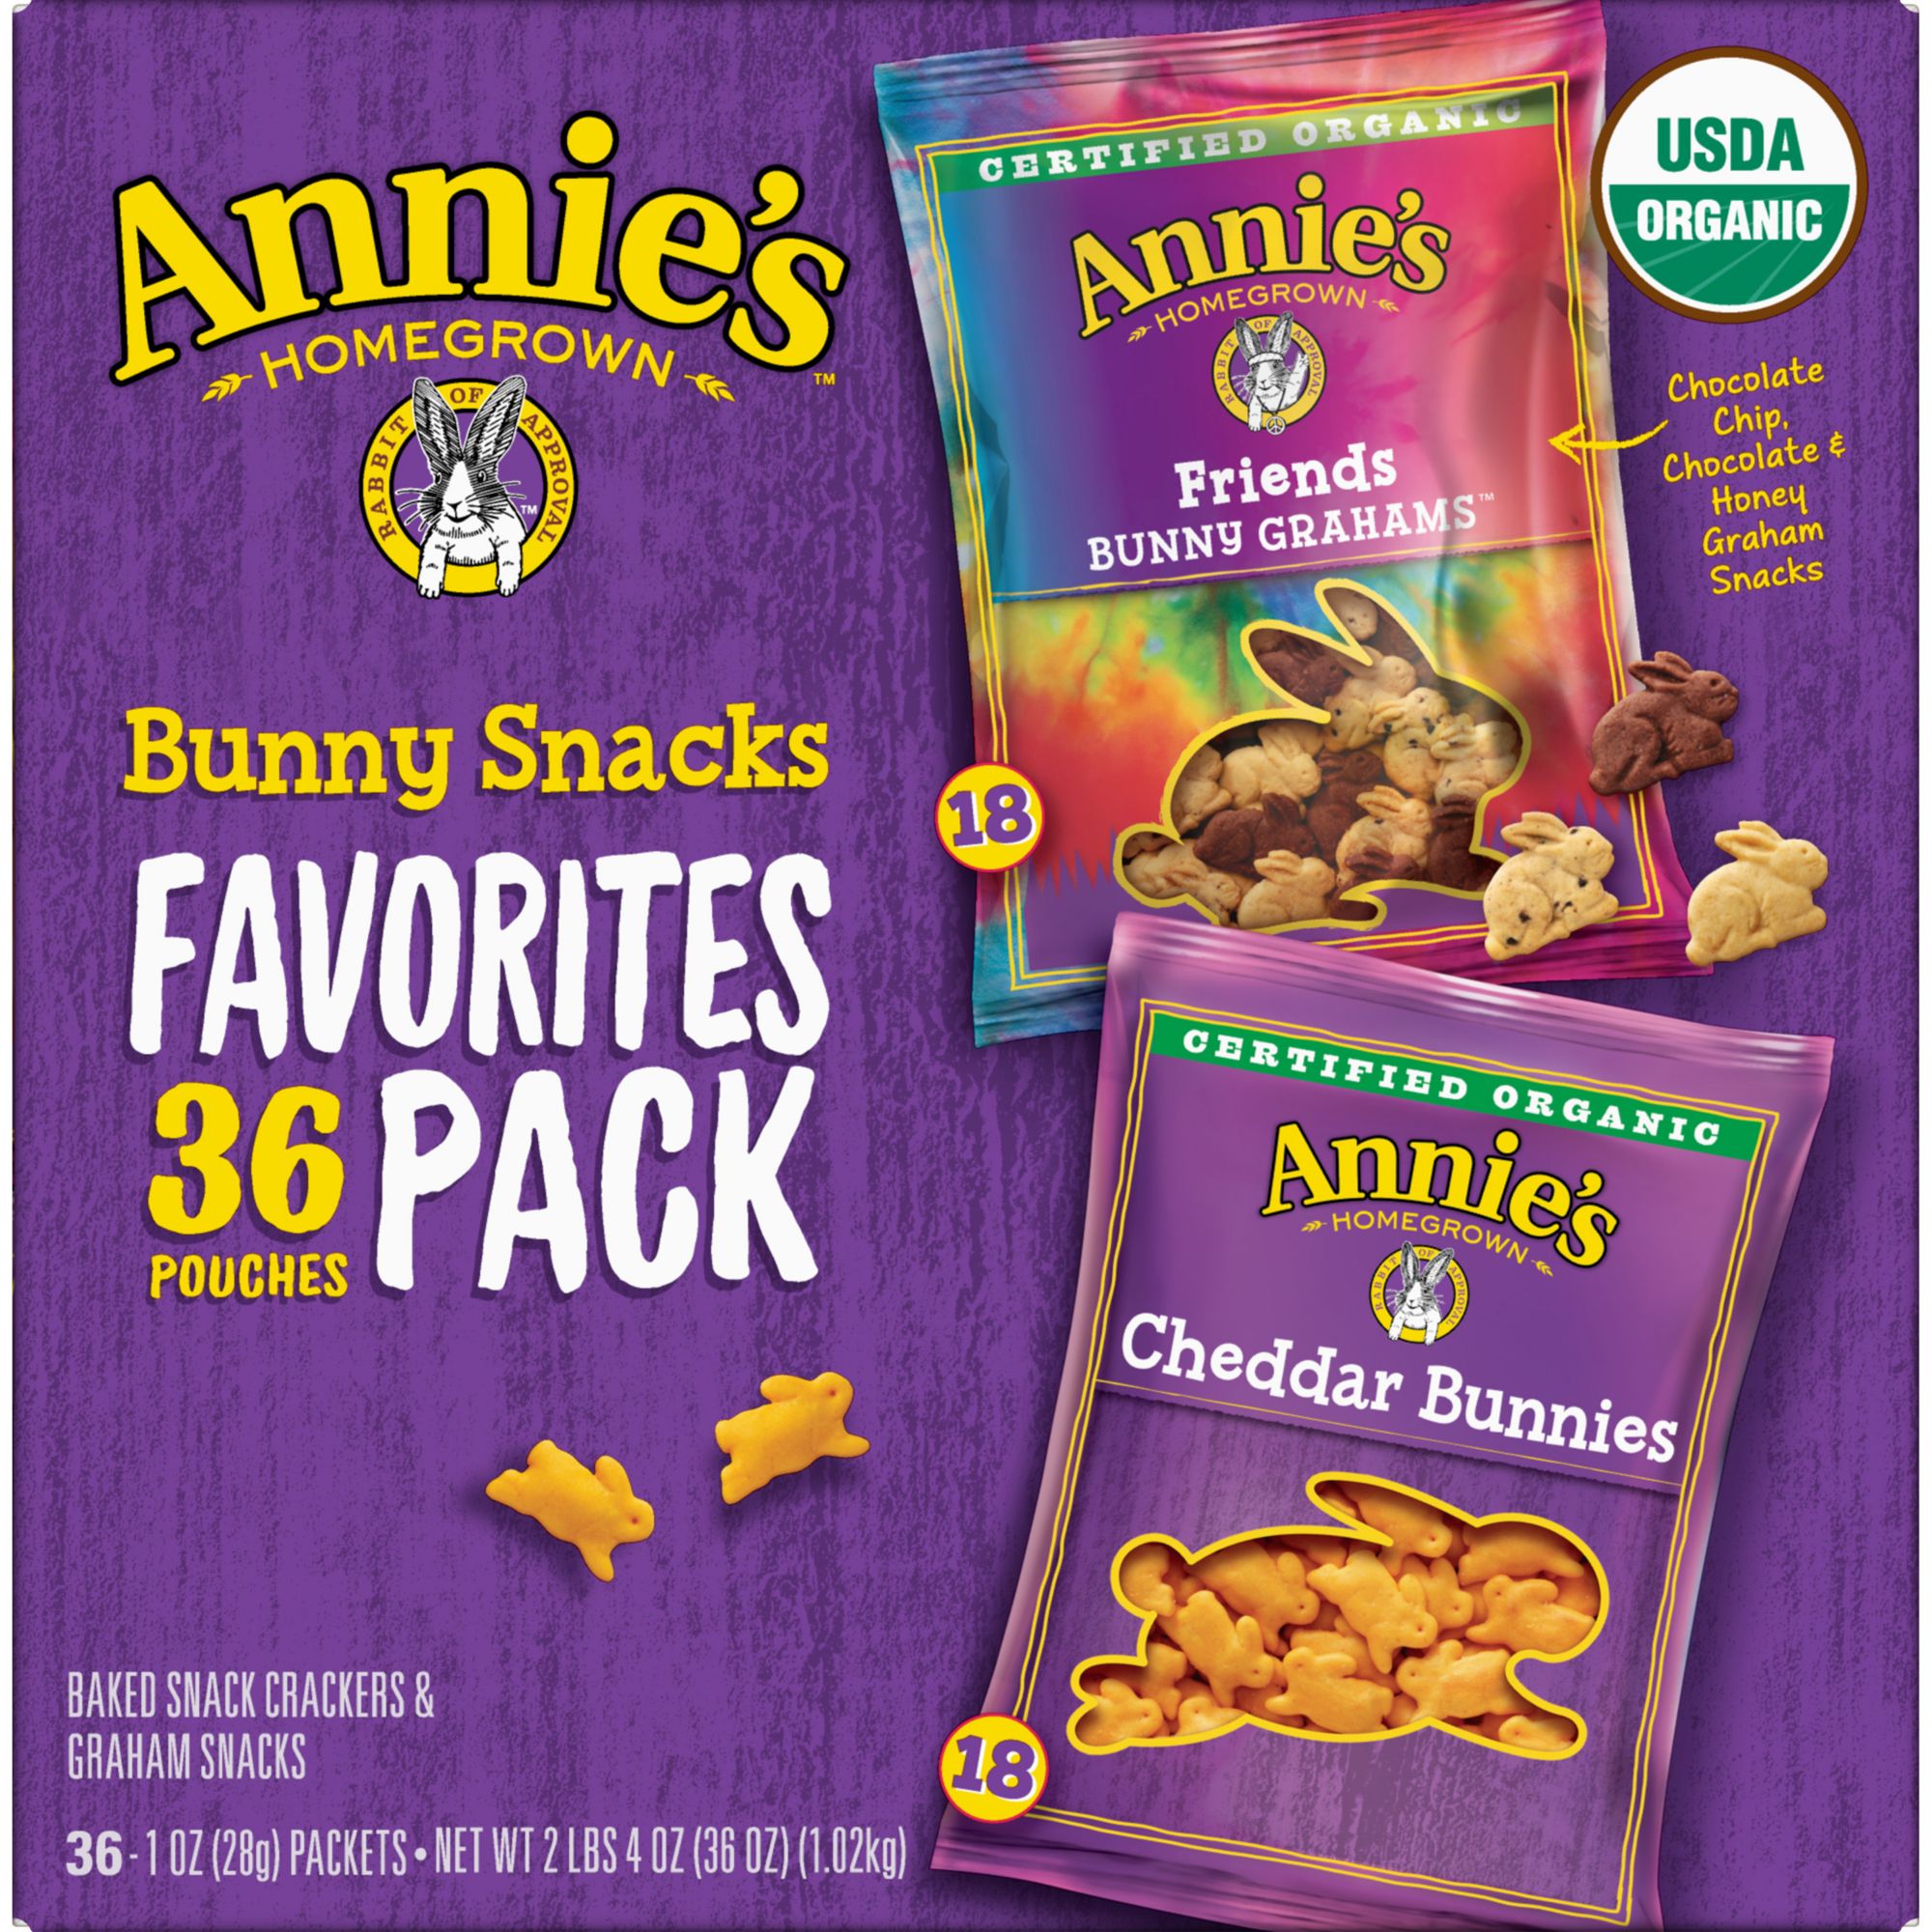 Annie's™ Organic Cheddar Bunnies Baked Snack Crackers, 12 ct